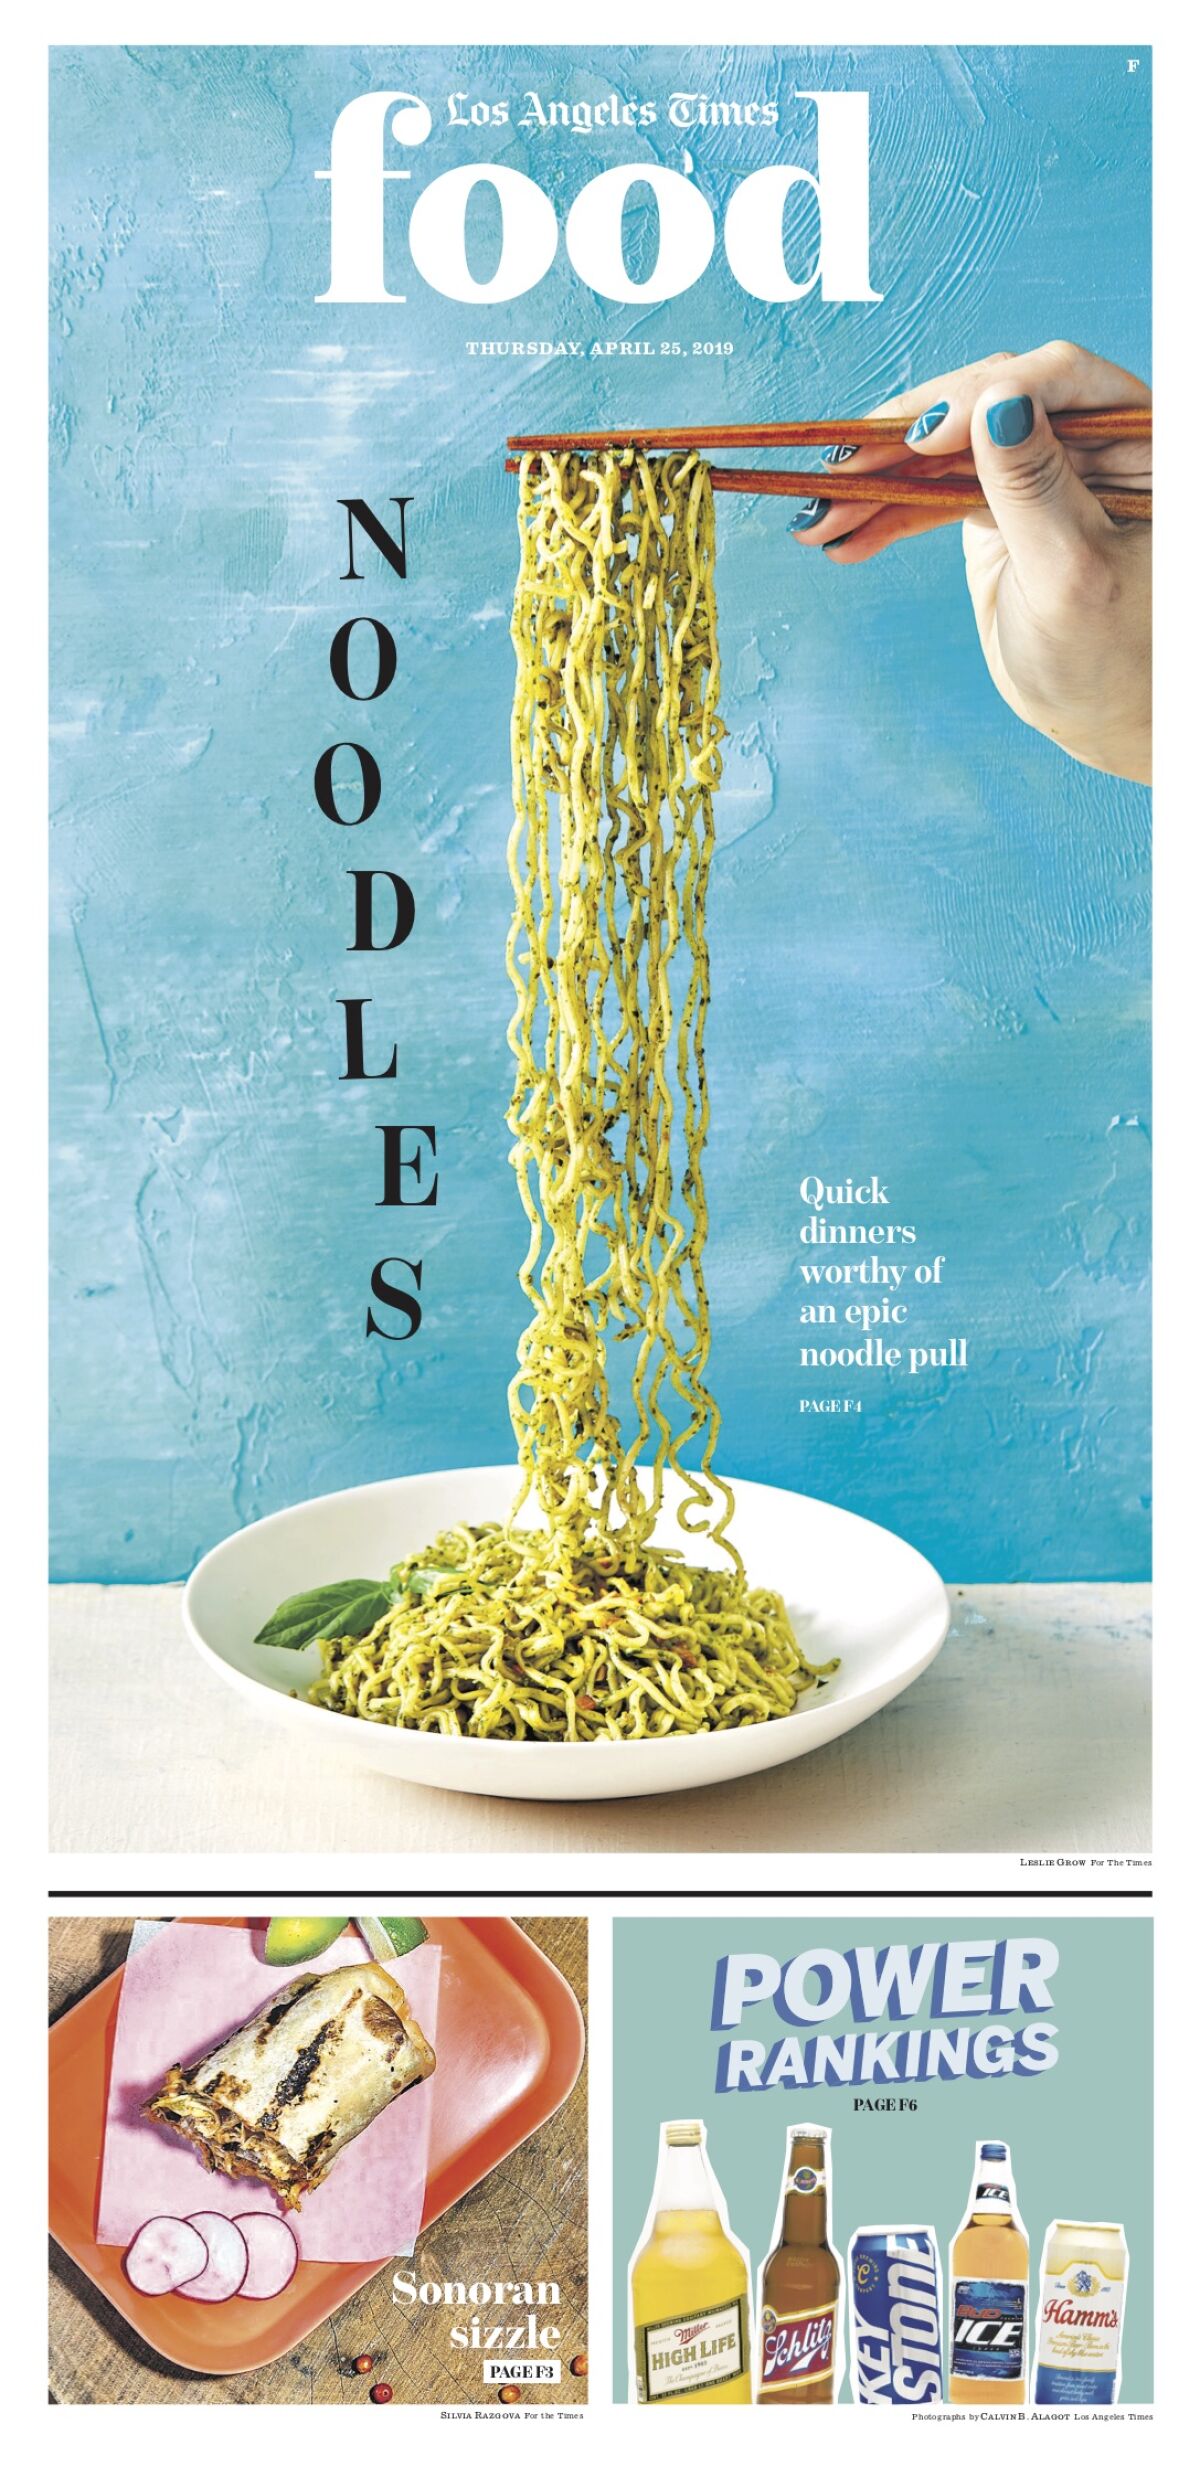 Los Angeles Times Food cover, April 25, 2019